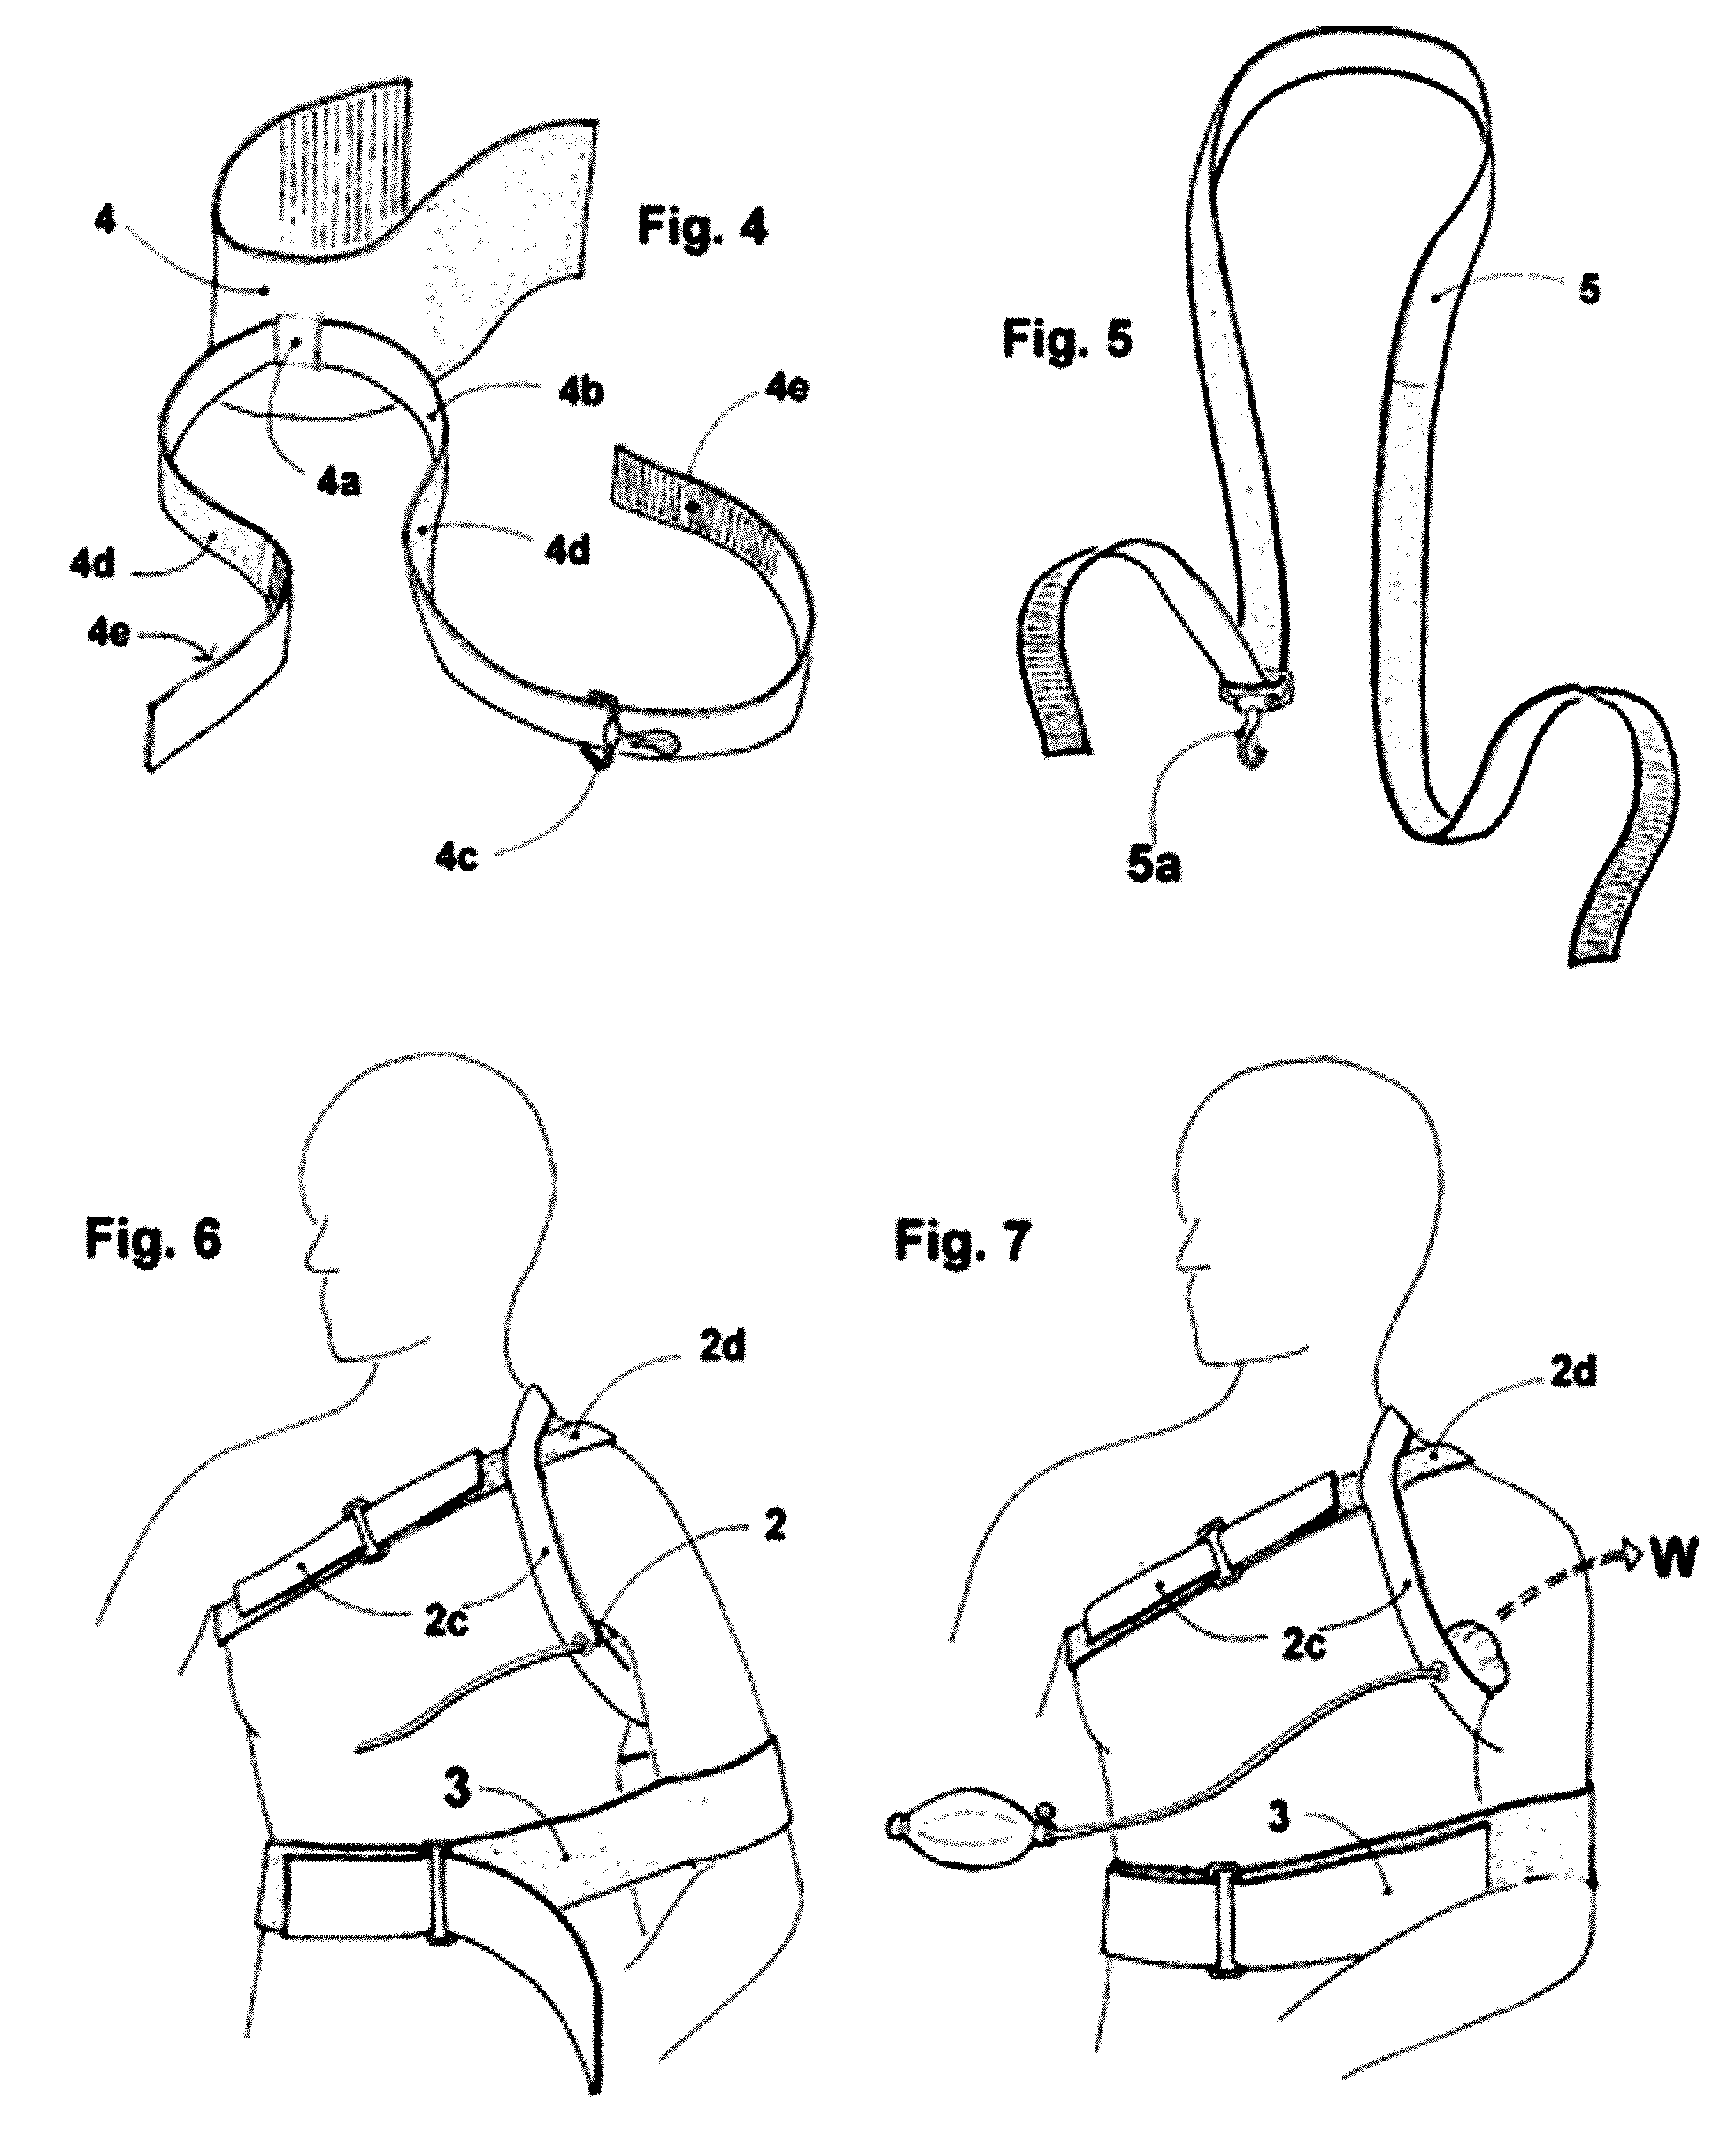 An orthopedic appliance and method to reduce anterior dislocation of shoulder and to provide post reduction immobilization